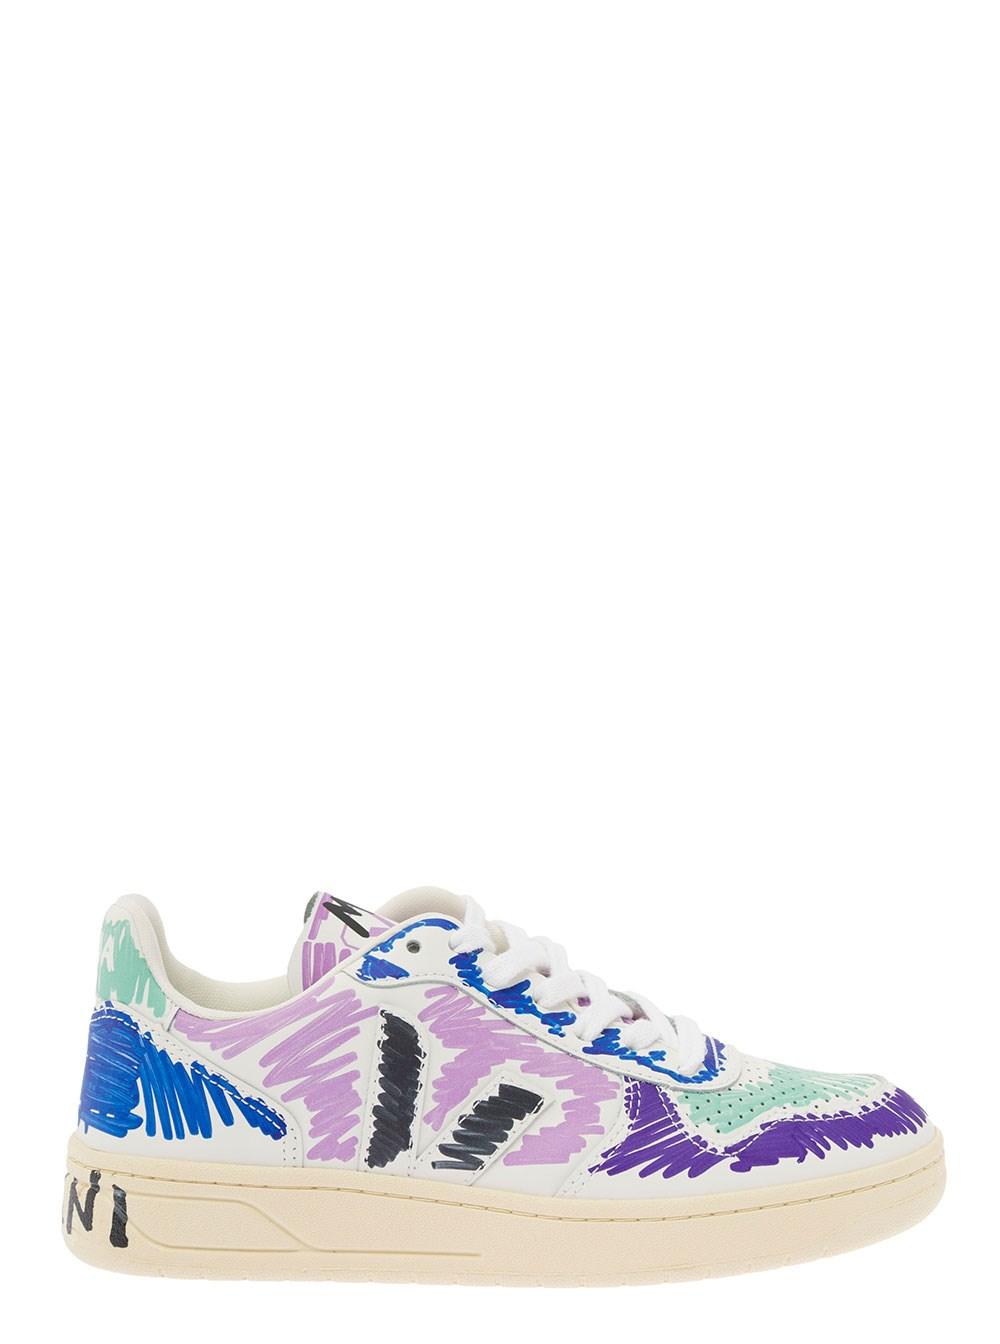 Marni Veja X Women's Leather Sneakers in White | Lyst